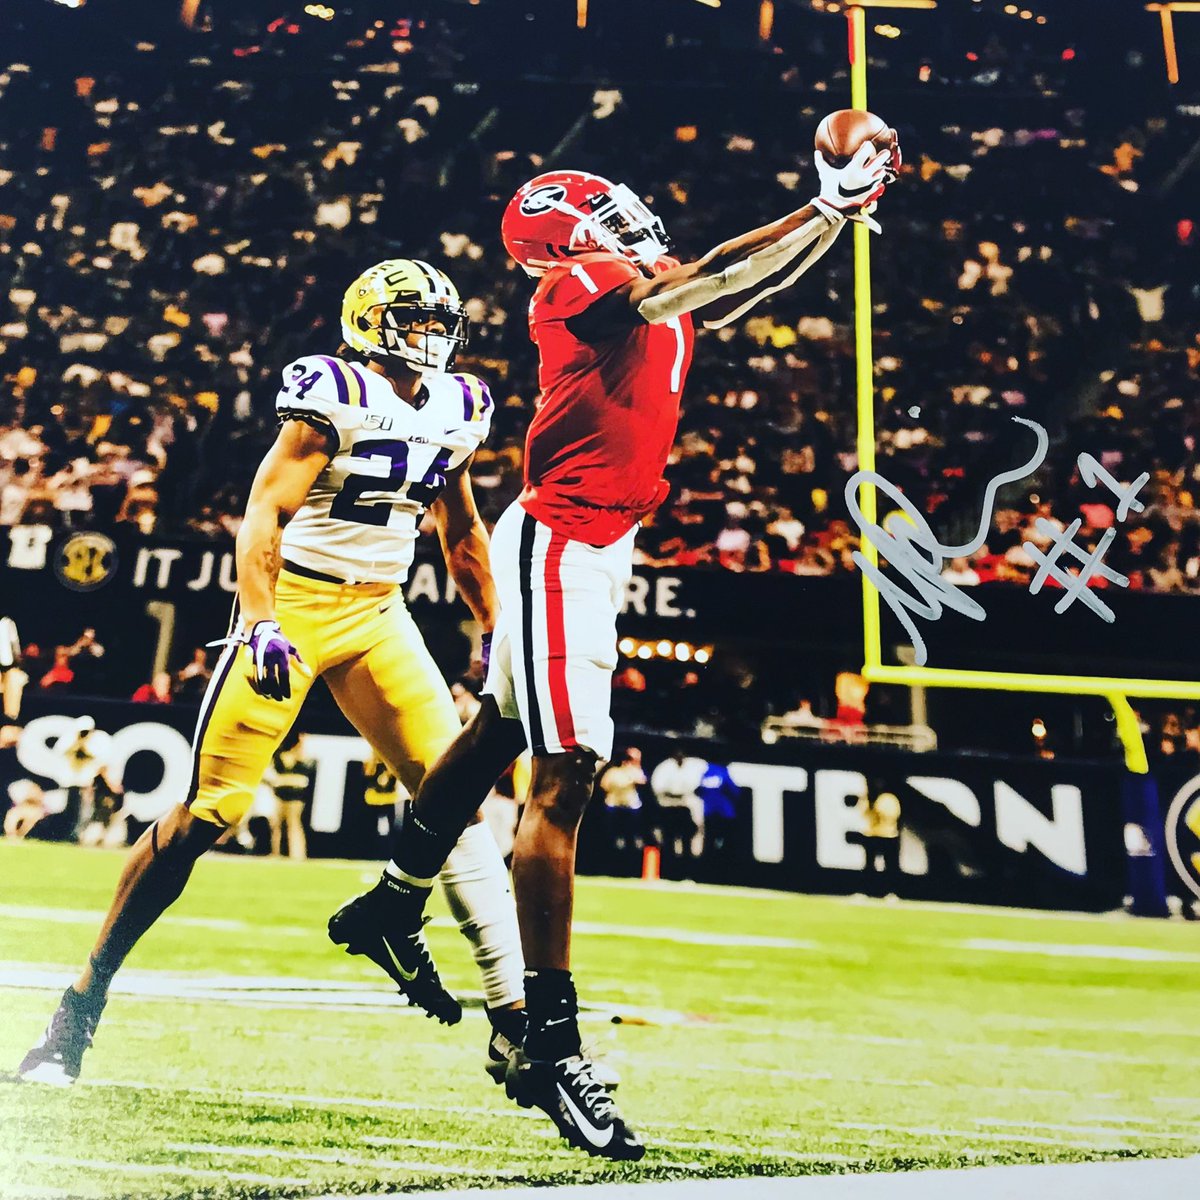 RT @SignedSweetSpot: SIX more SATURDAYS until Georgia Football https://t.co/CaKEcyF9M5